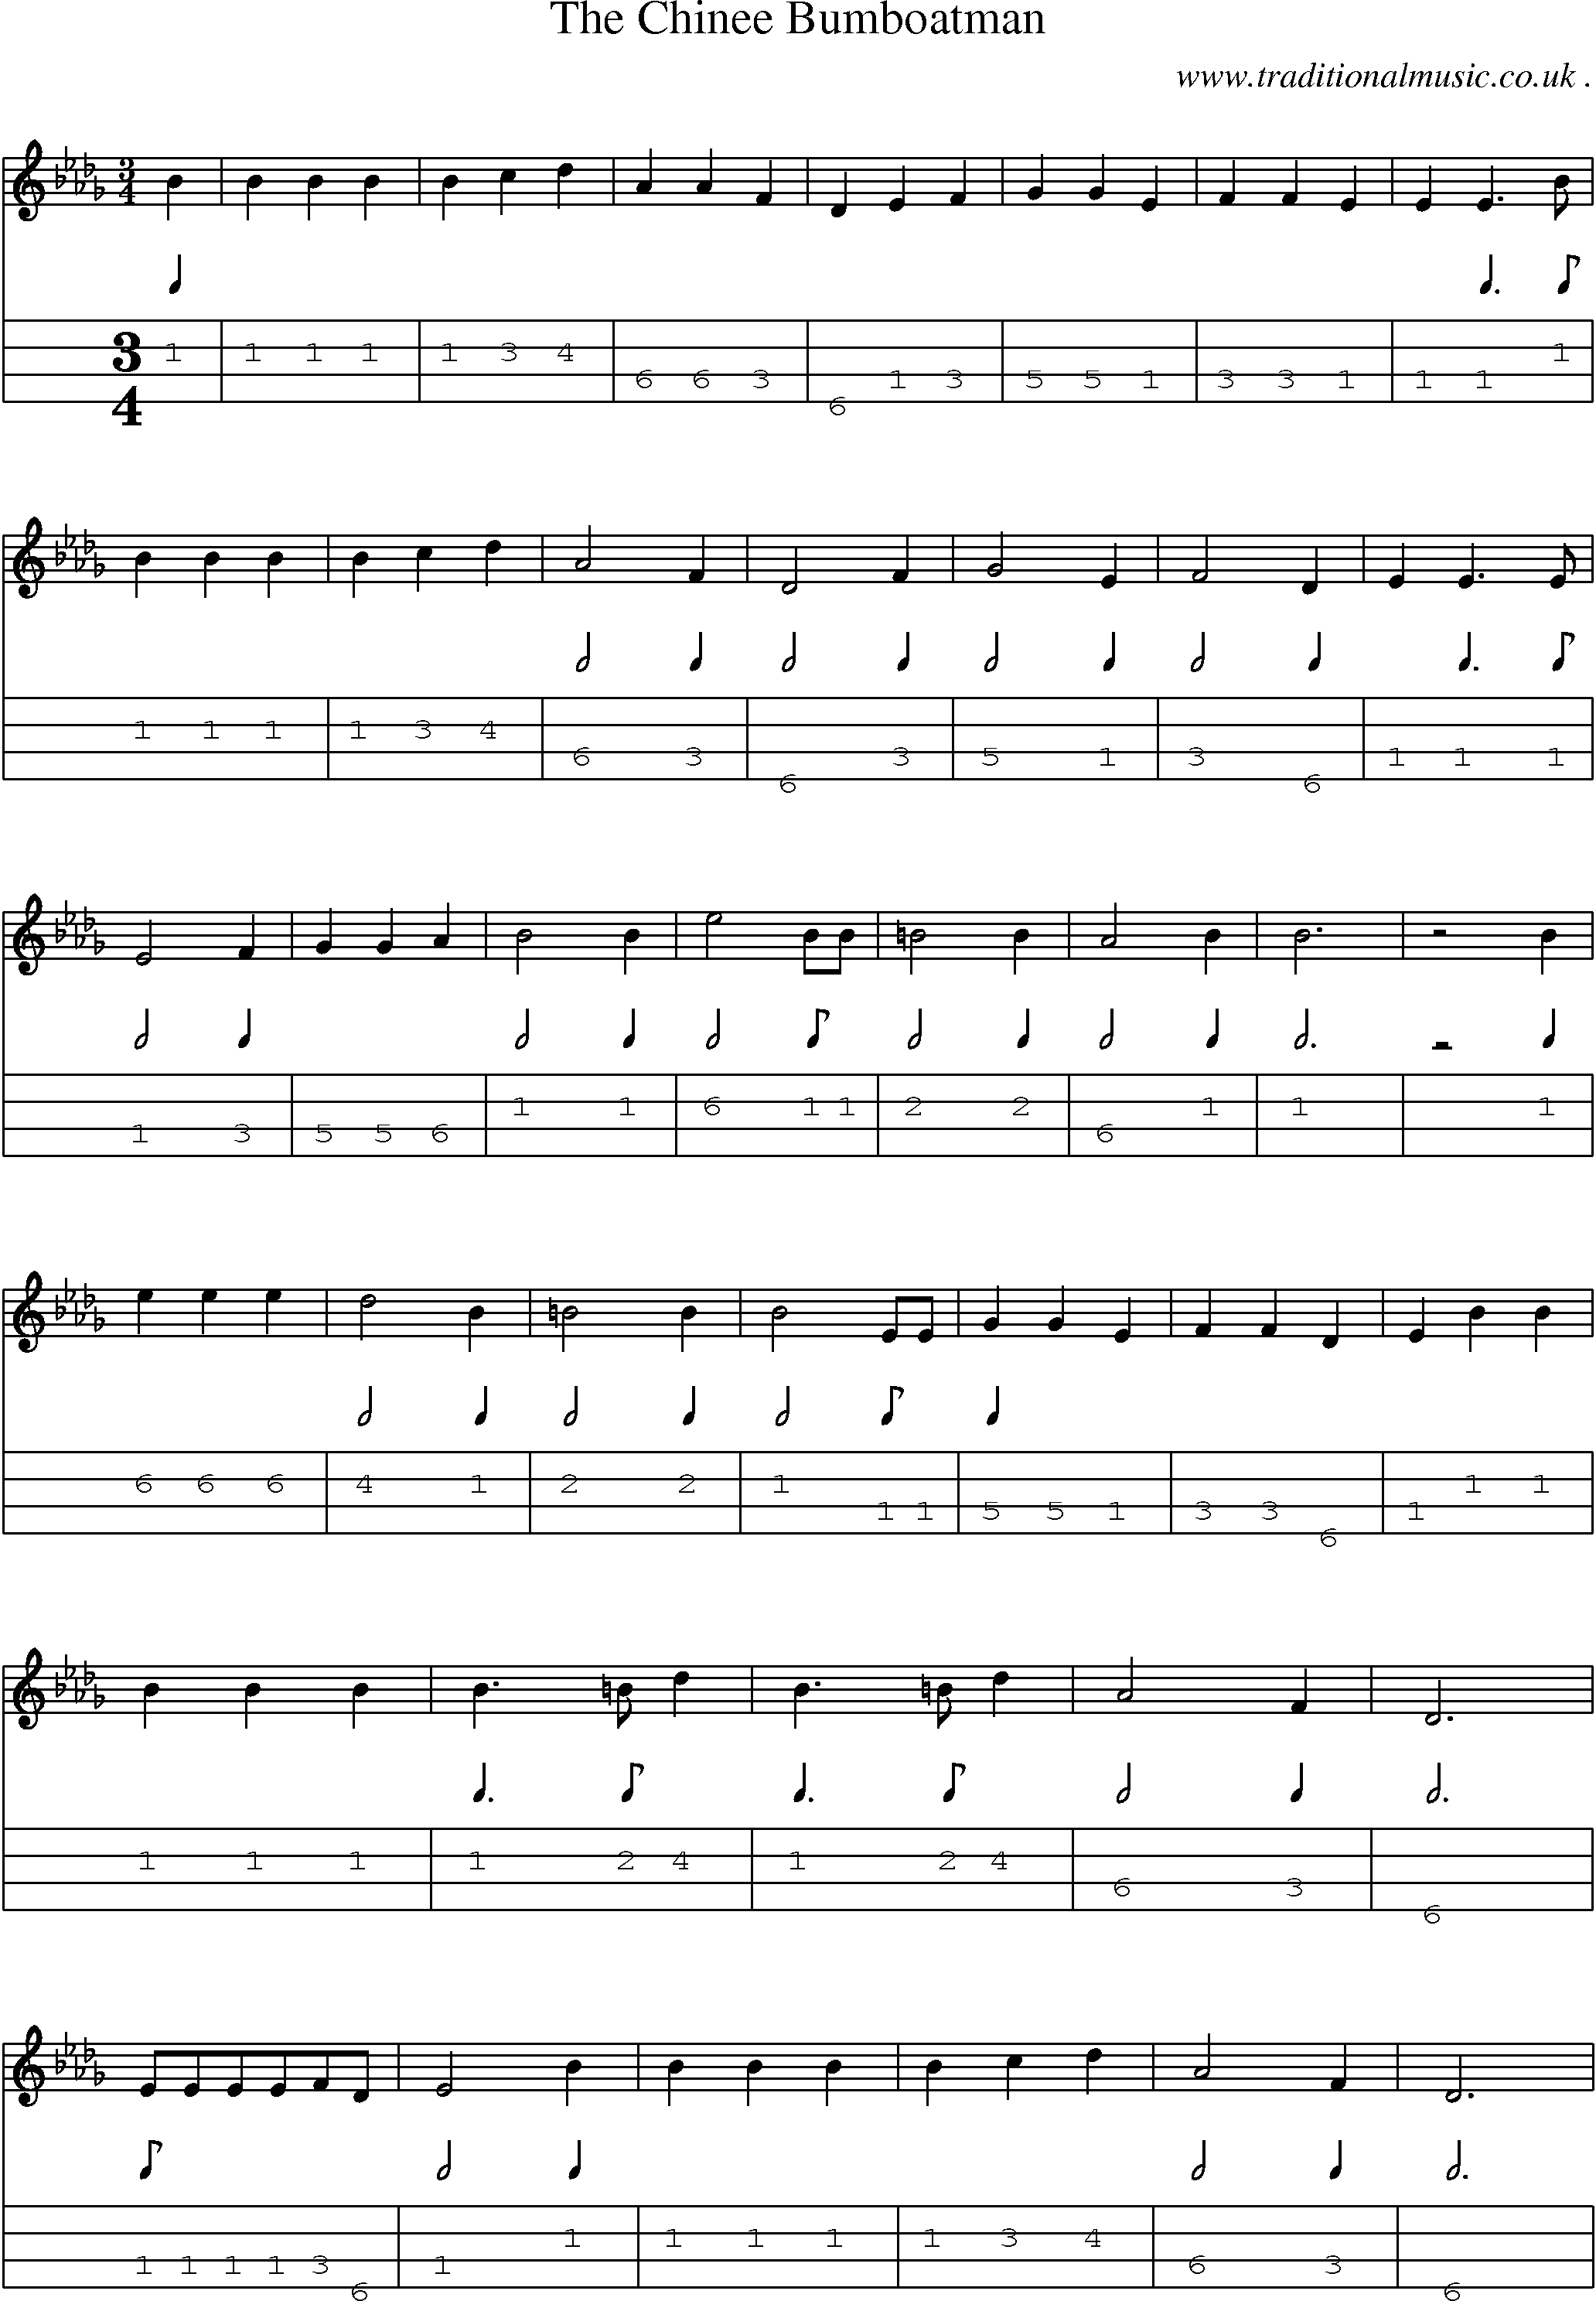 Sheet-Music and Mandolin Tabs for The Chinee Bumboatman